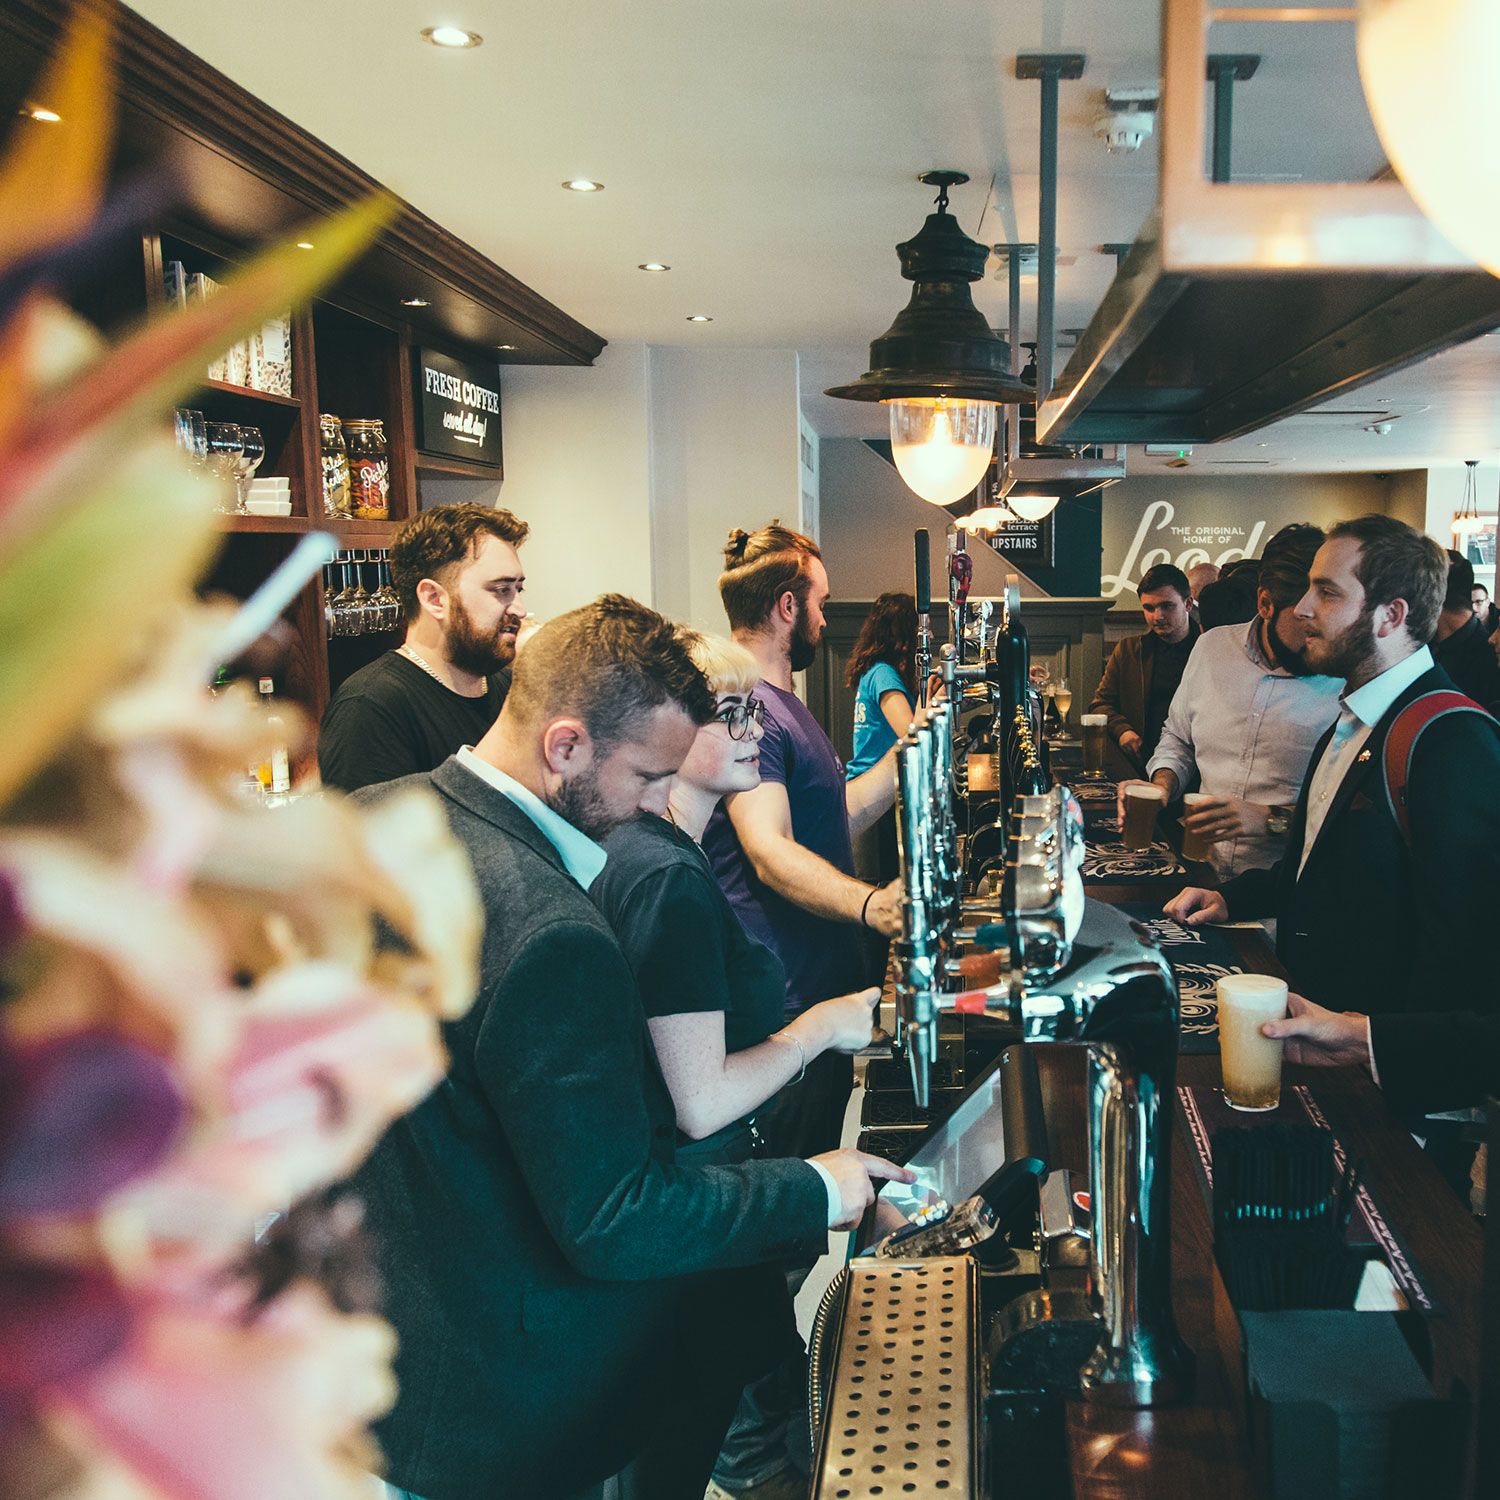 Image of people at the bar in Leeds brewery Tap